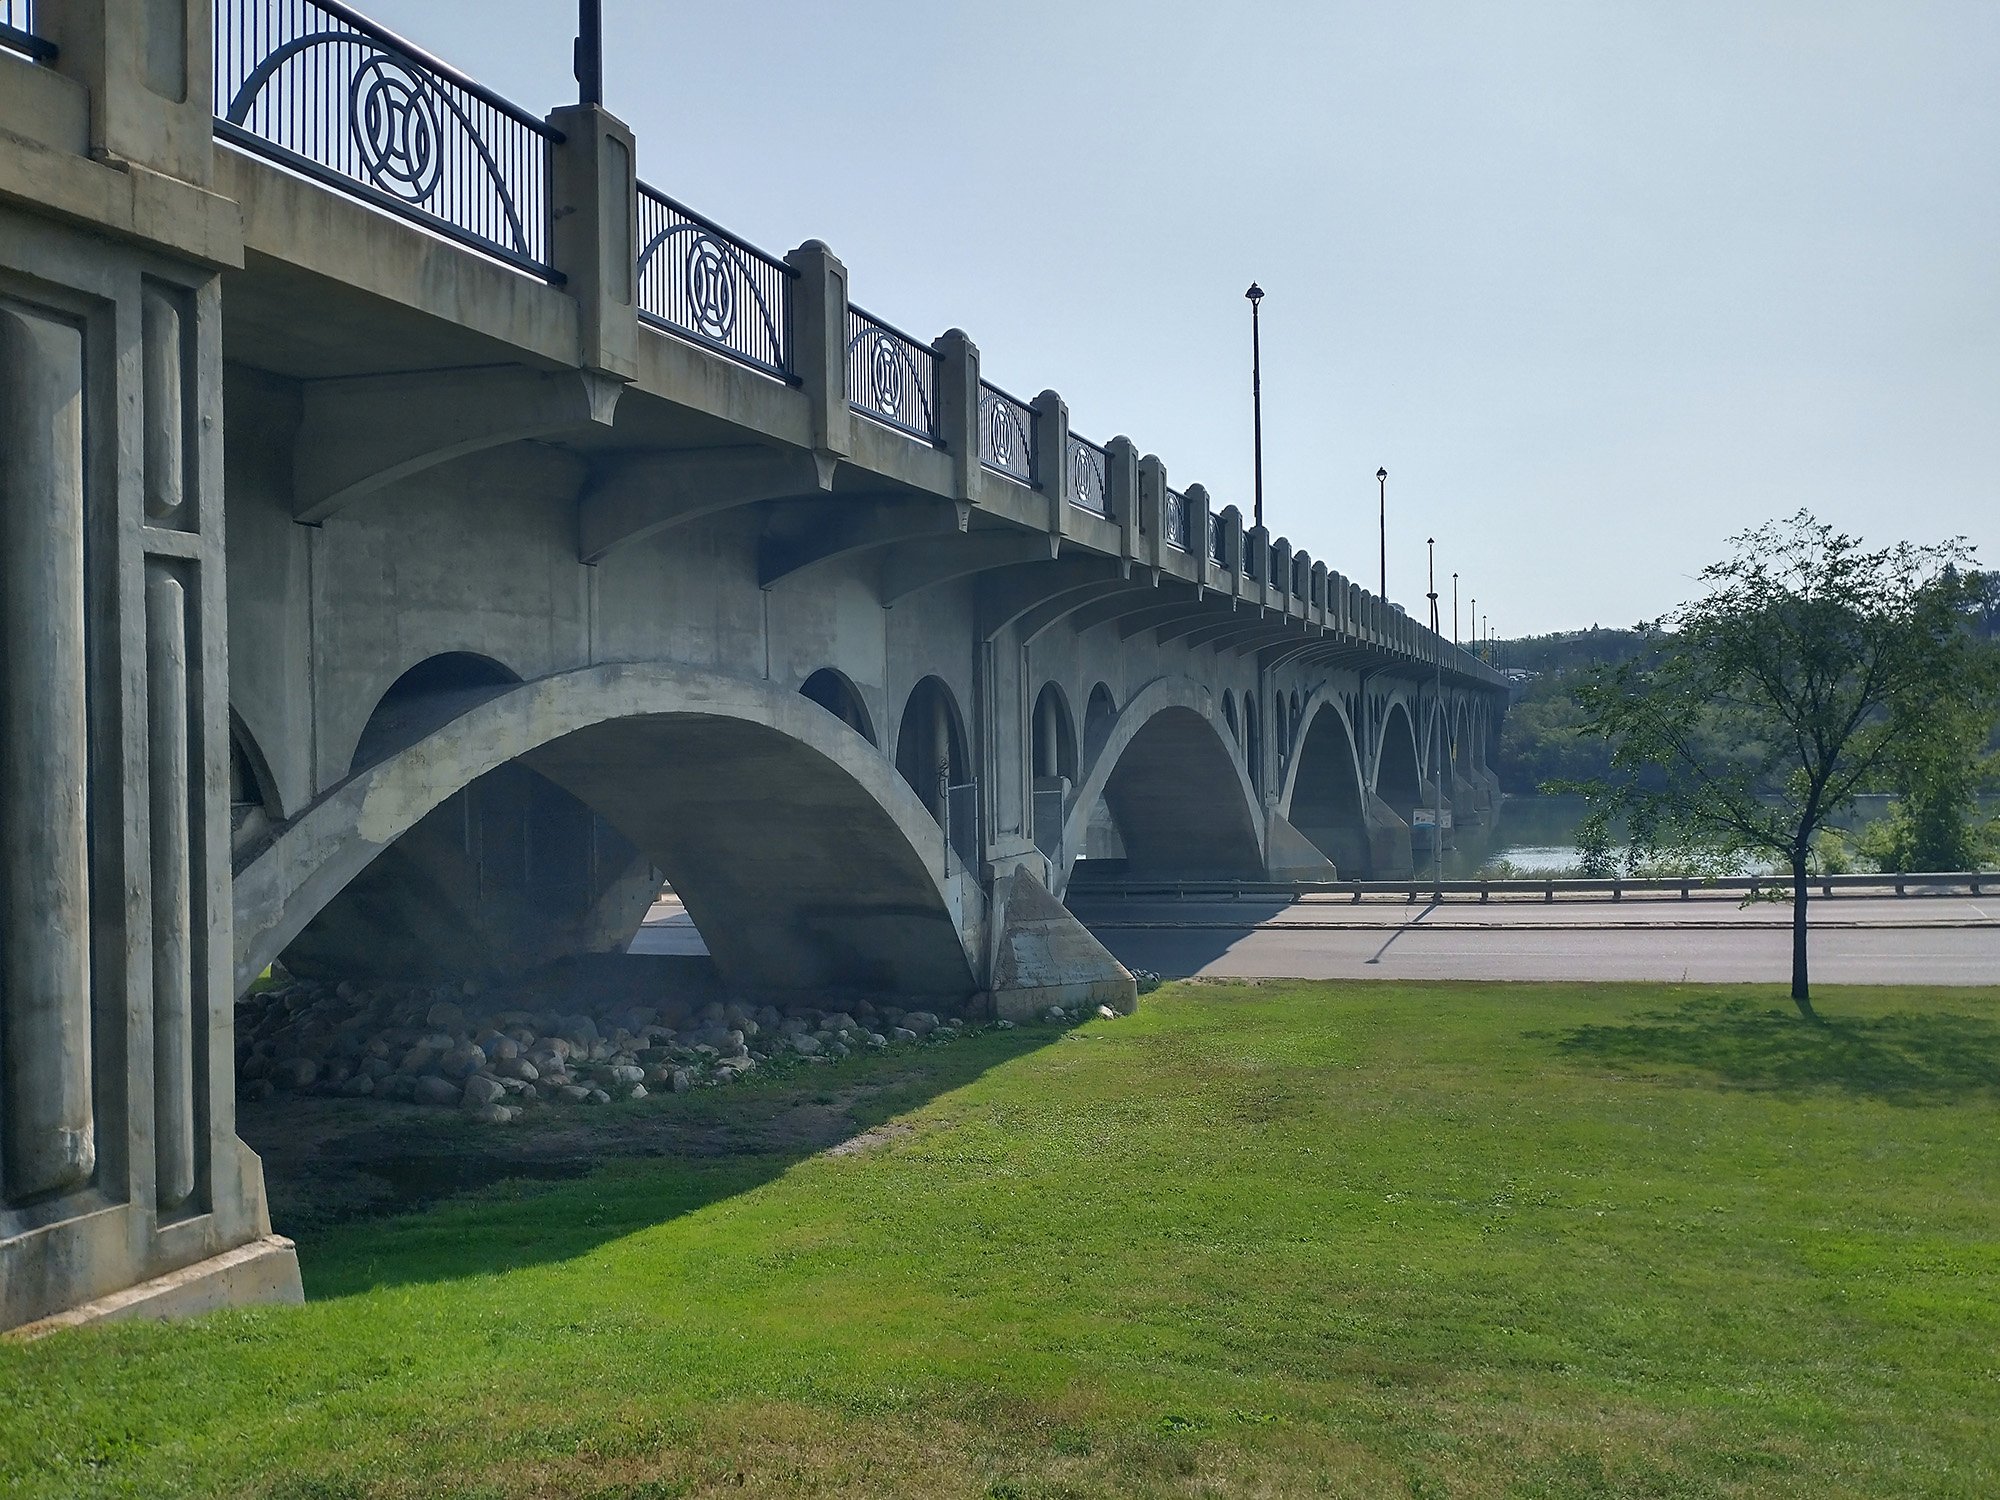 Under the large bridge that crosses the river downtown.